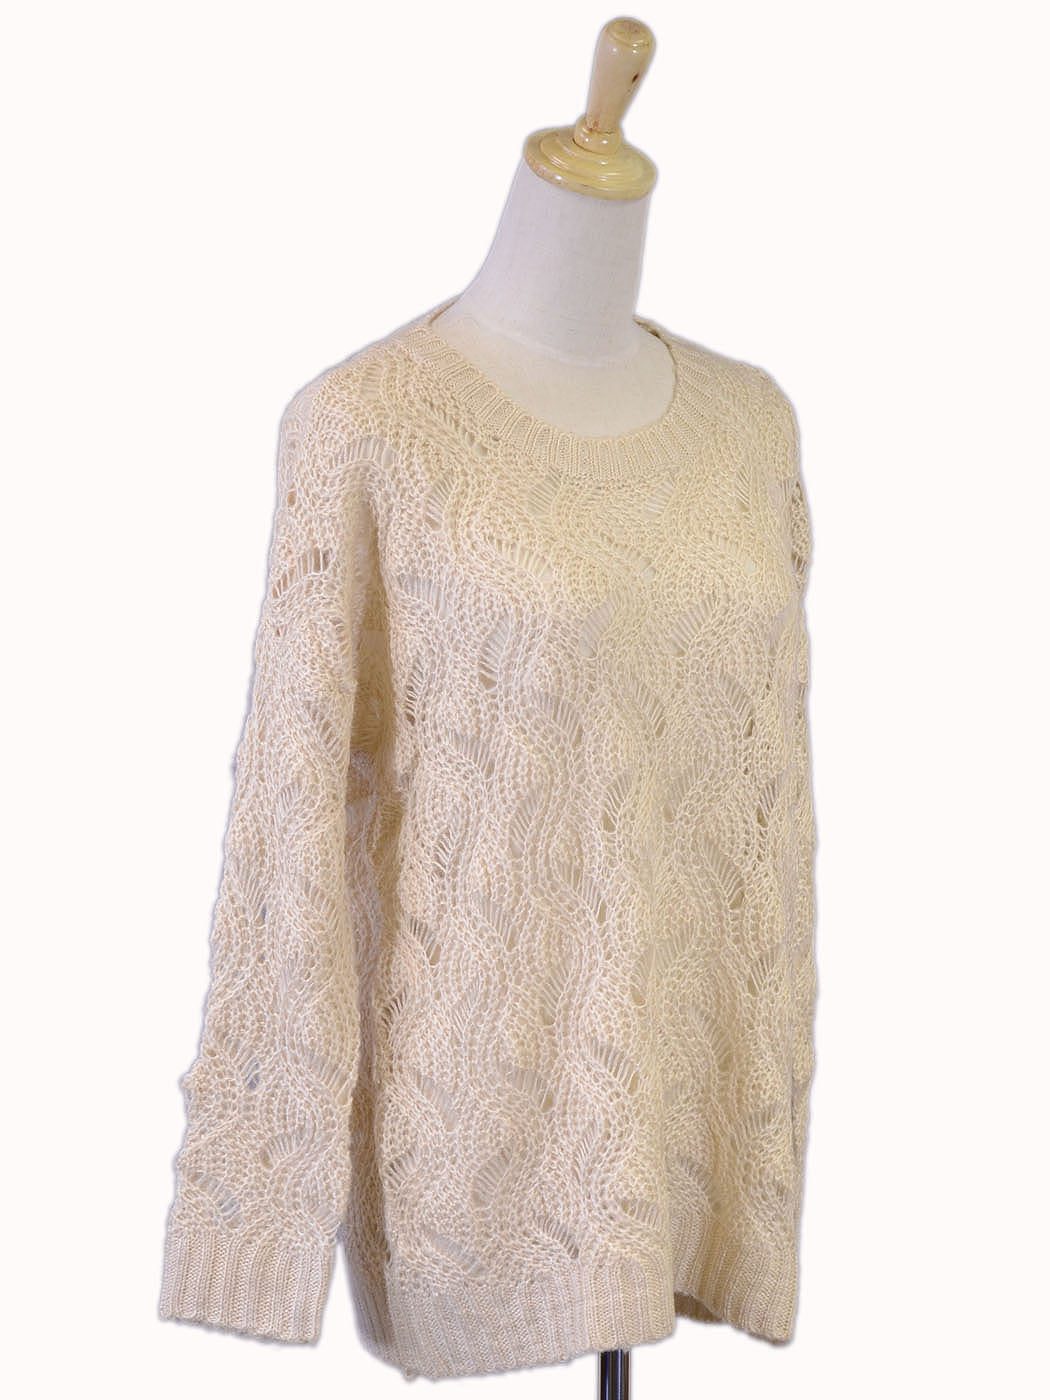 Cotton Candy Long Sleeve Open Knit Design Knitted Jumper With Scoop neck - ALILANG.COM